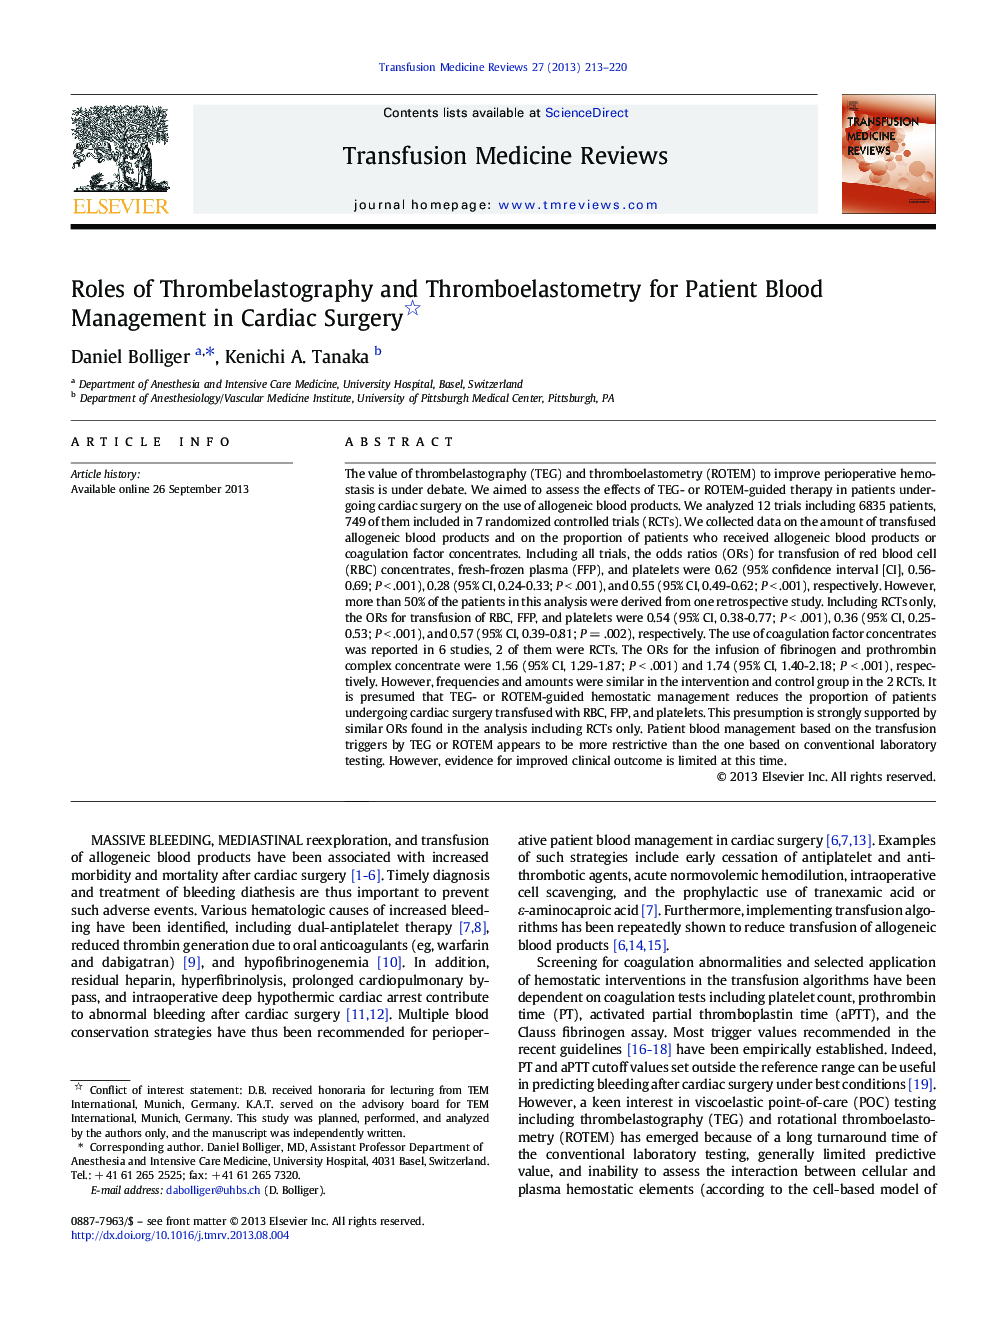 Roles of Thrombelastography and Thromboelastometry for Patient Blood Management in Cardiac Surgery 